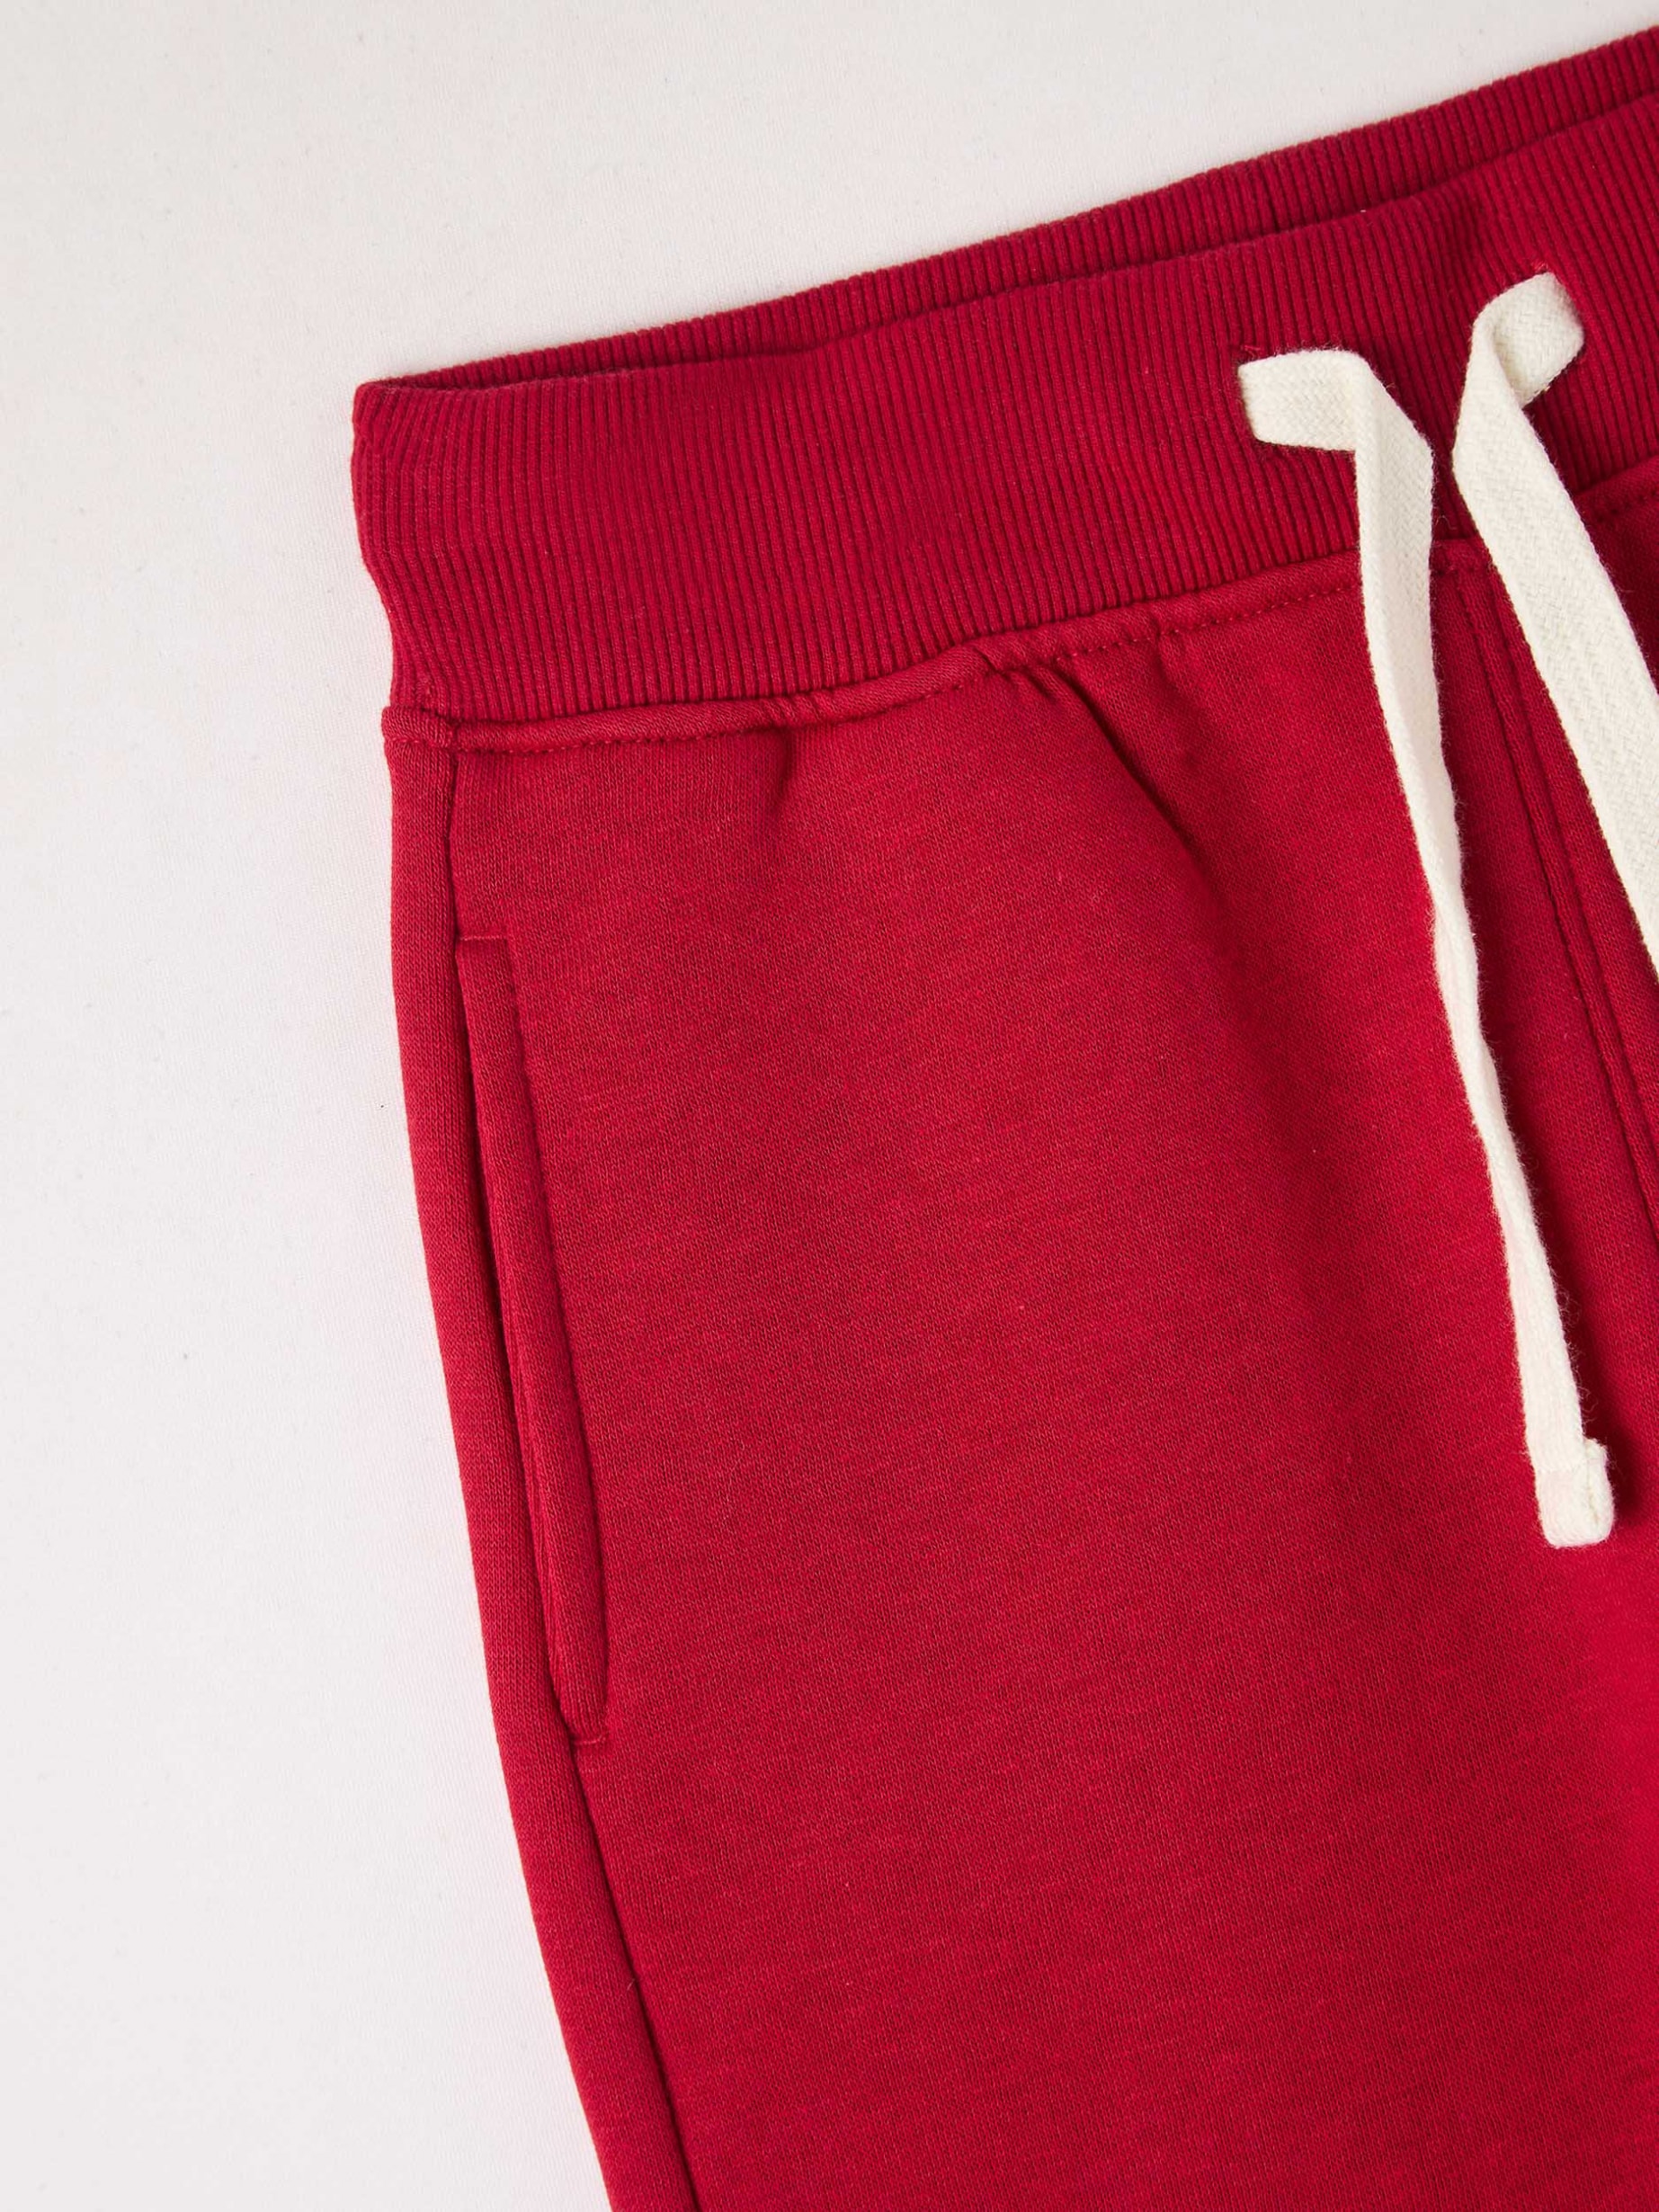 Red Tracksuit bottoms with print - Buy Online